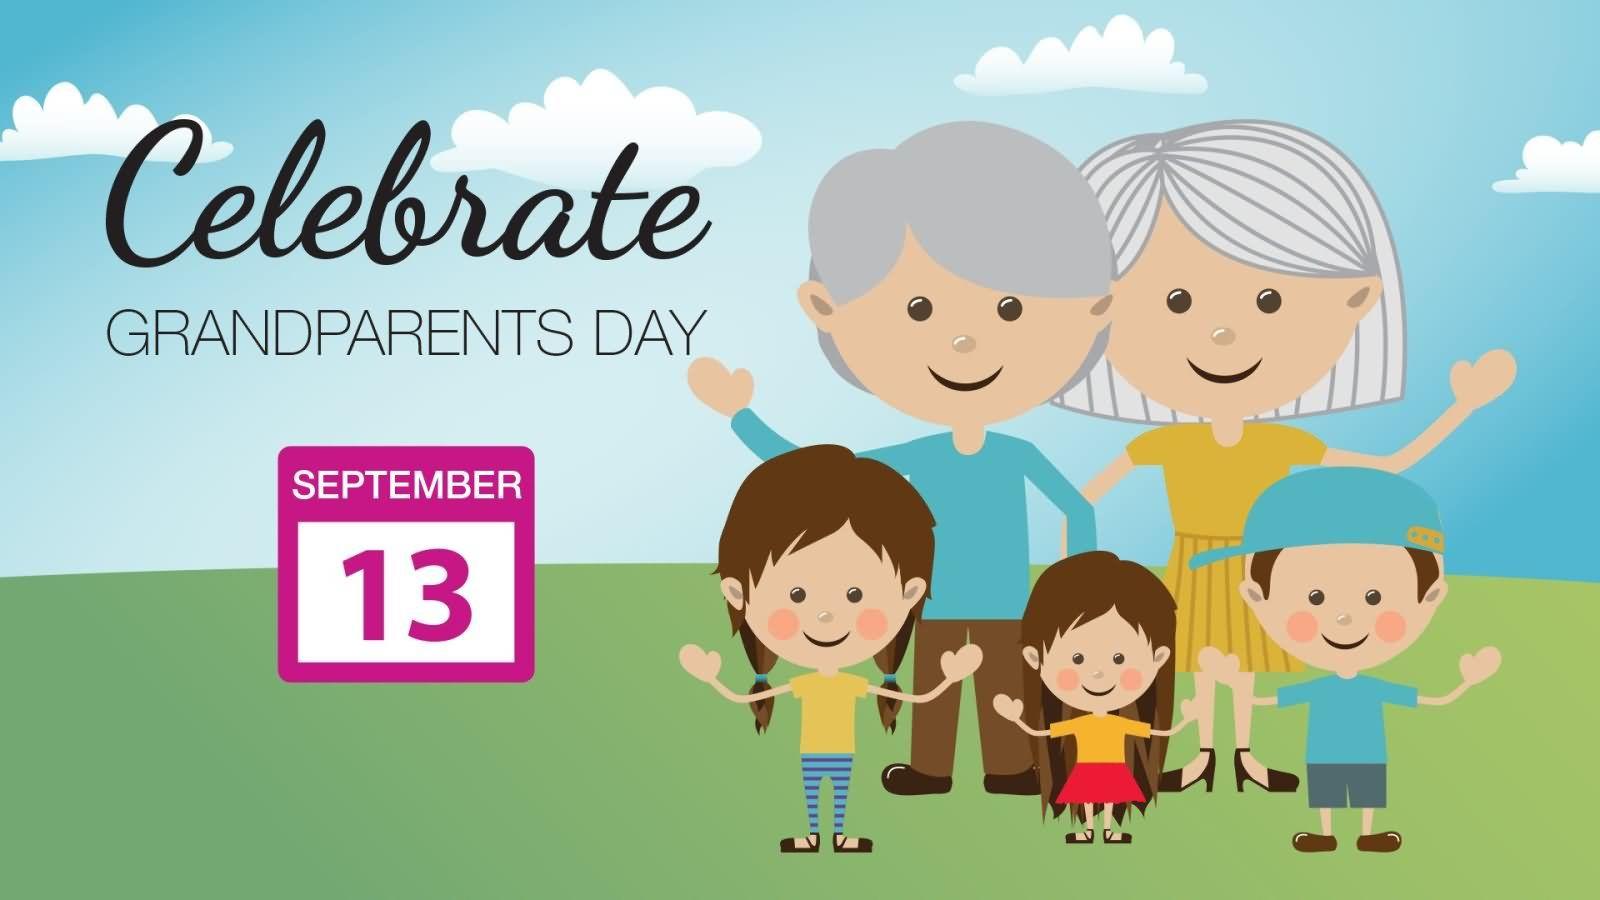 Download Grandparents Day Wallpapers - Wallpaper Cave